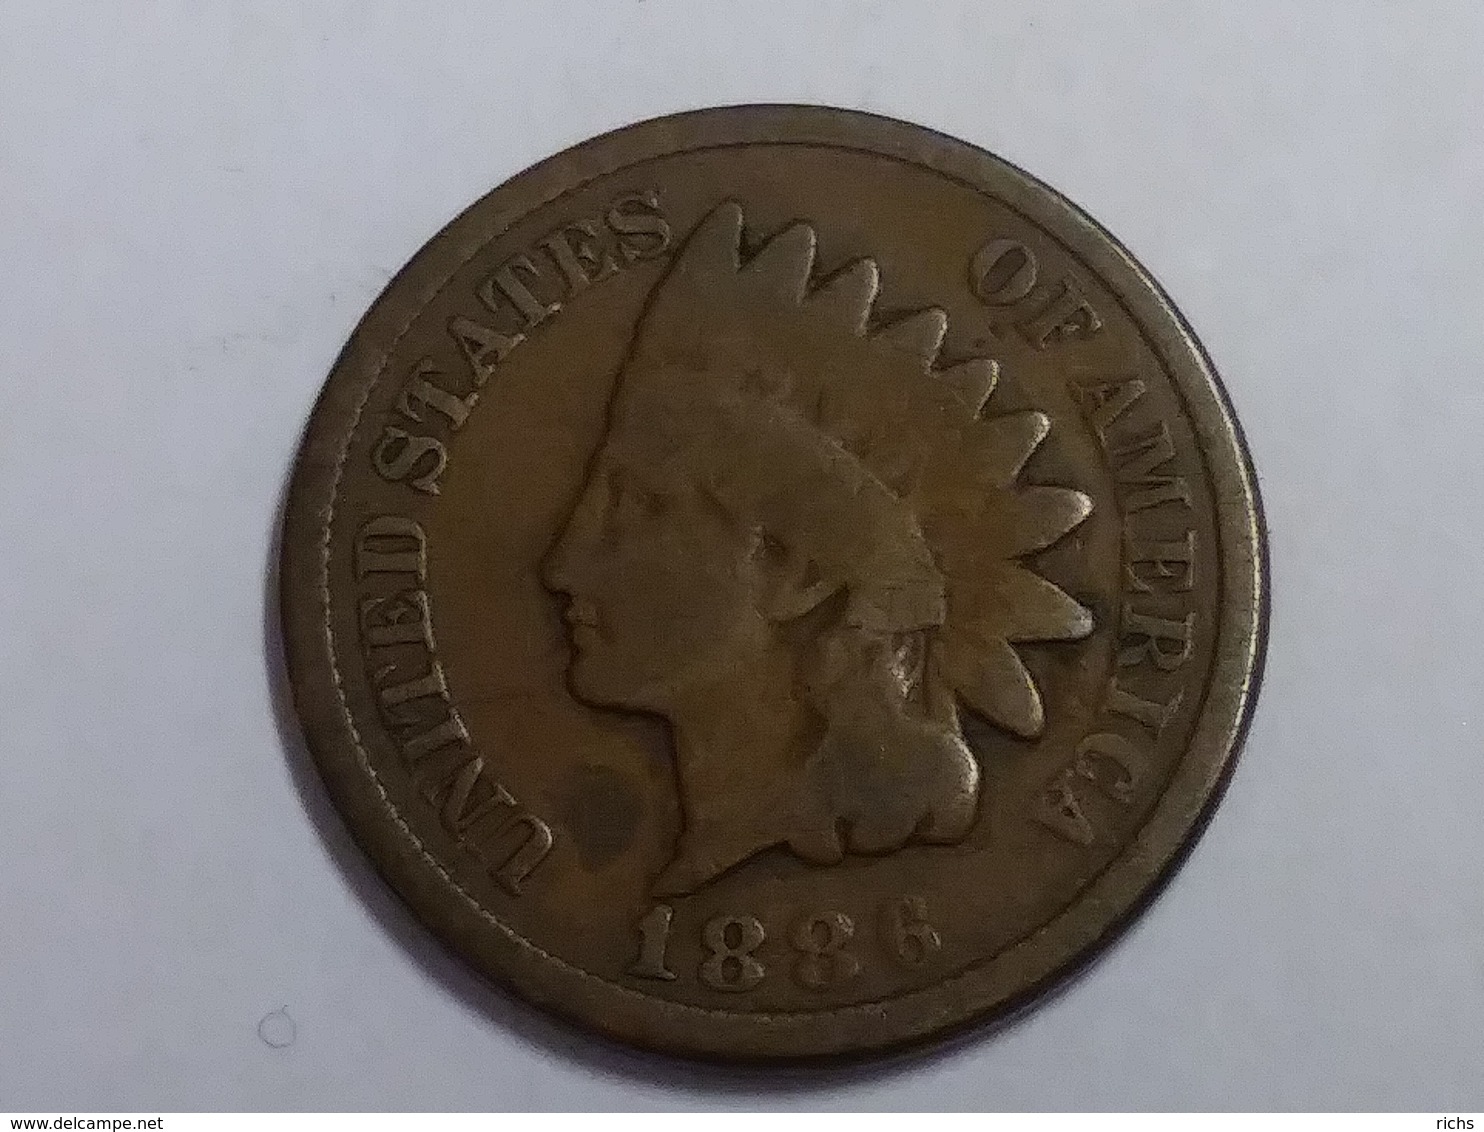 1886 Indian Head Cent - 1859-1909: Indian Head